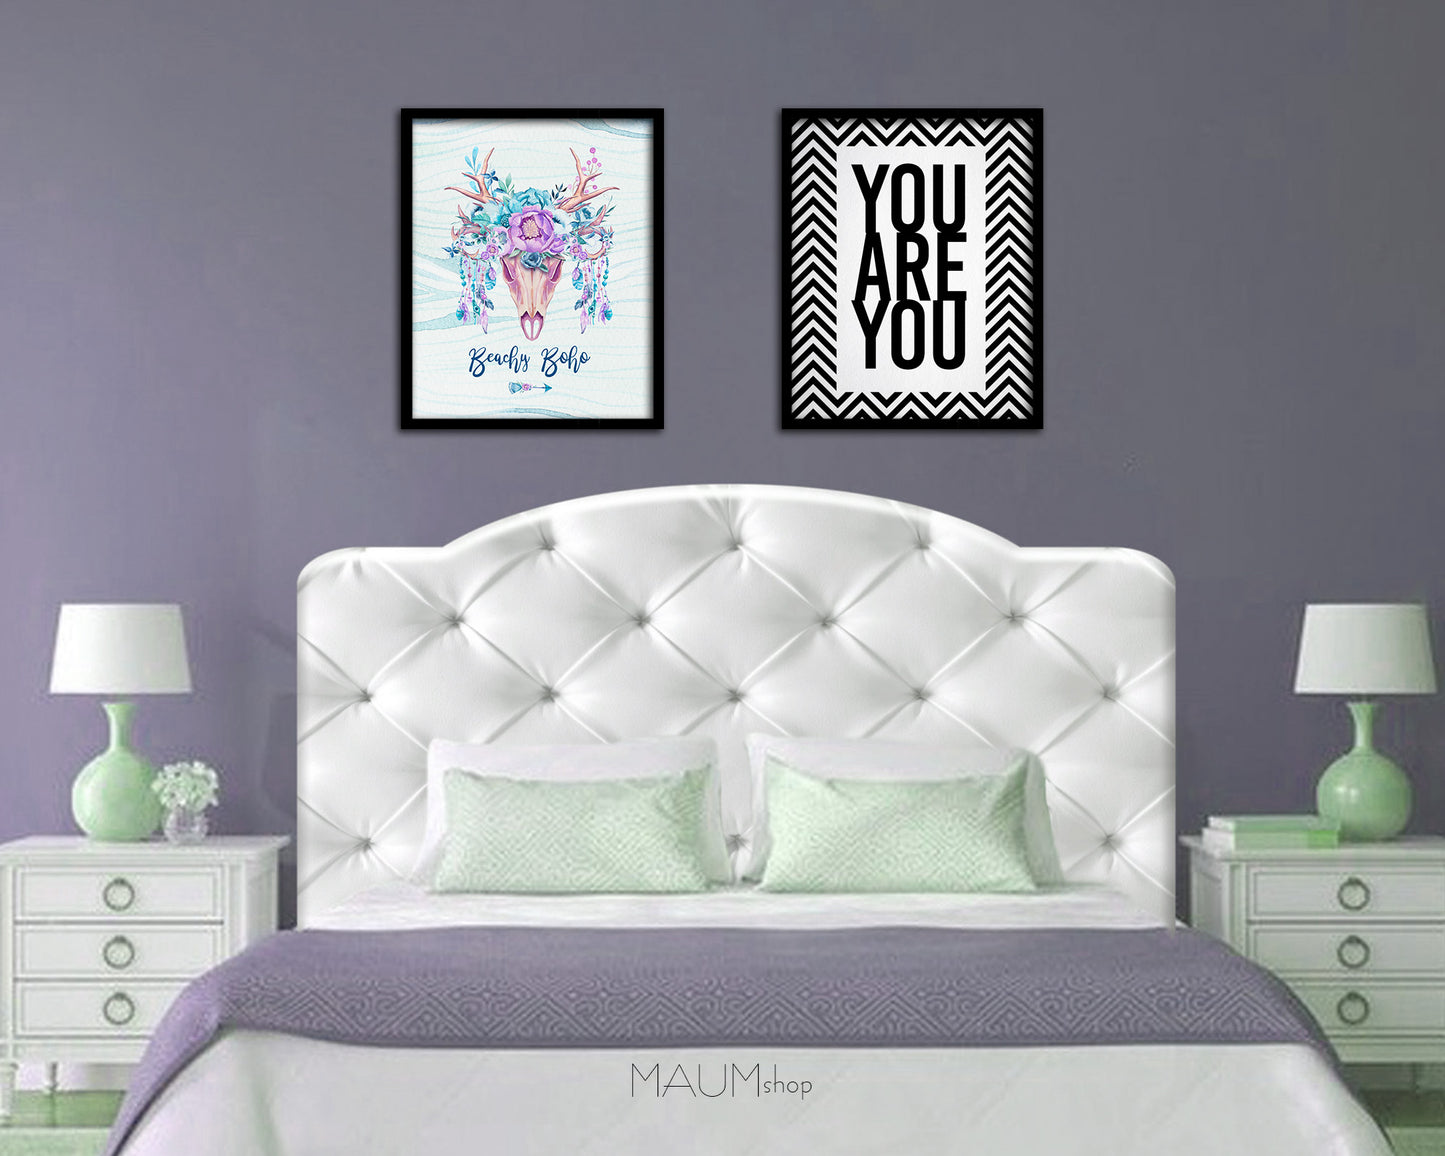 You Are You you Framed Print Wall Decor Art Gifts